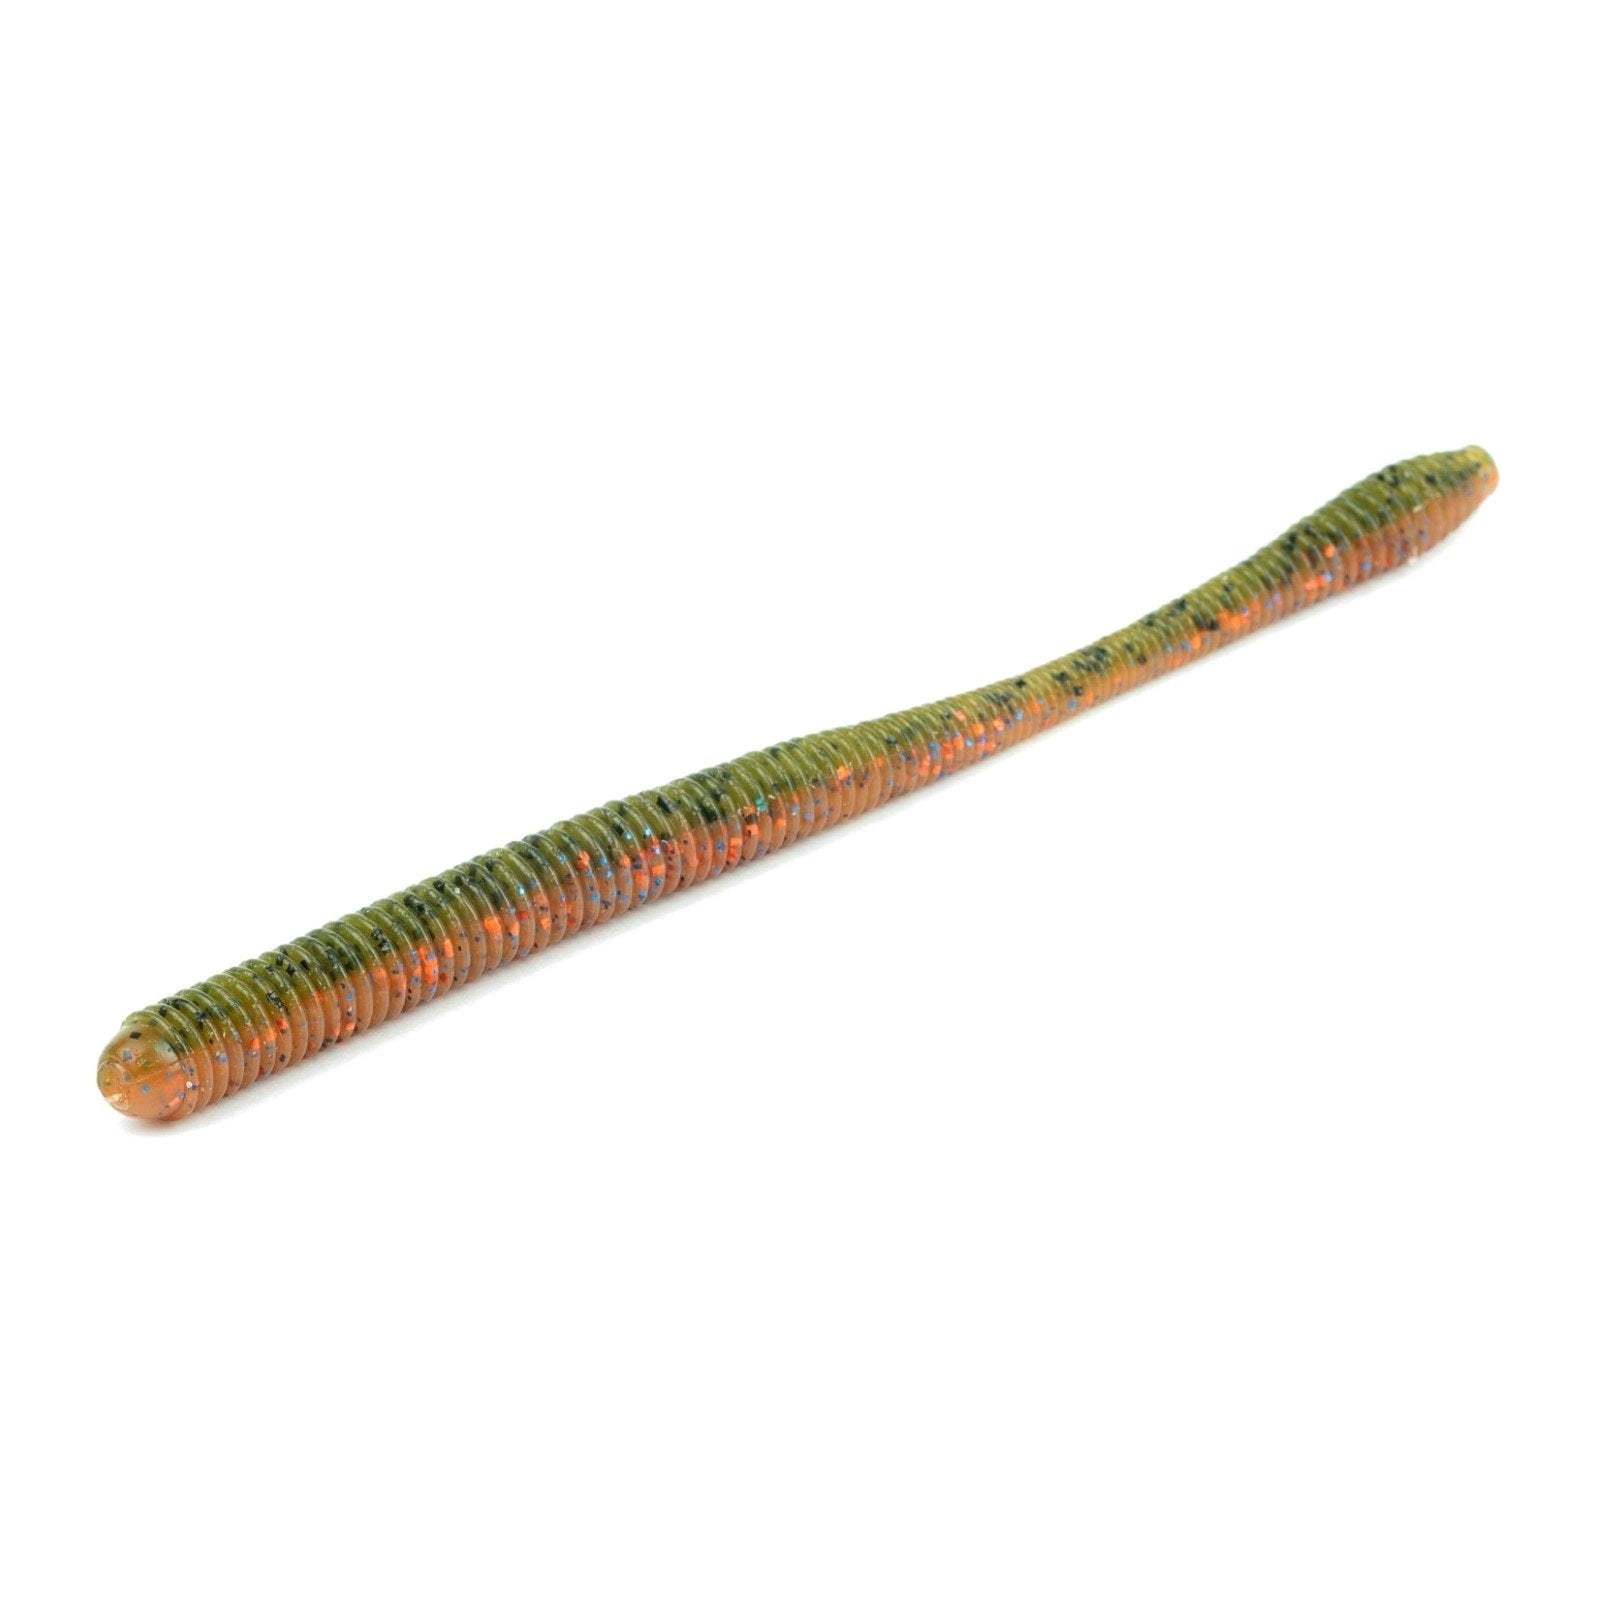 6TH SENSE DIVINE SHAKEY WORM SERIES - Copperstate Tackle